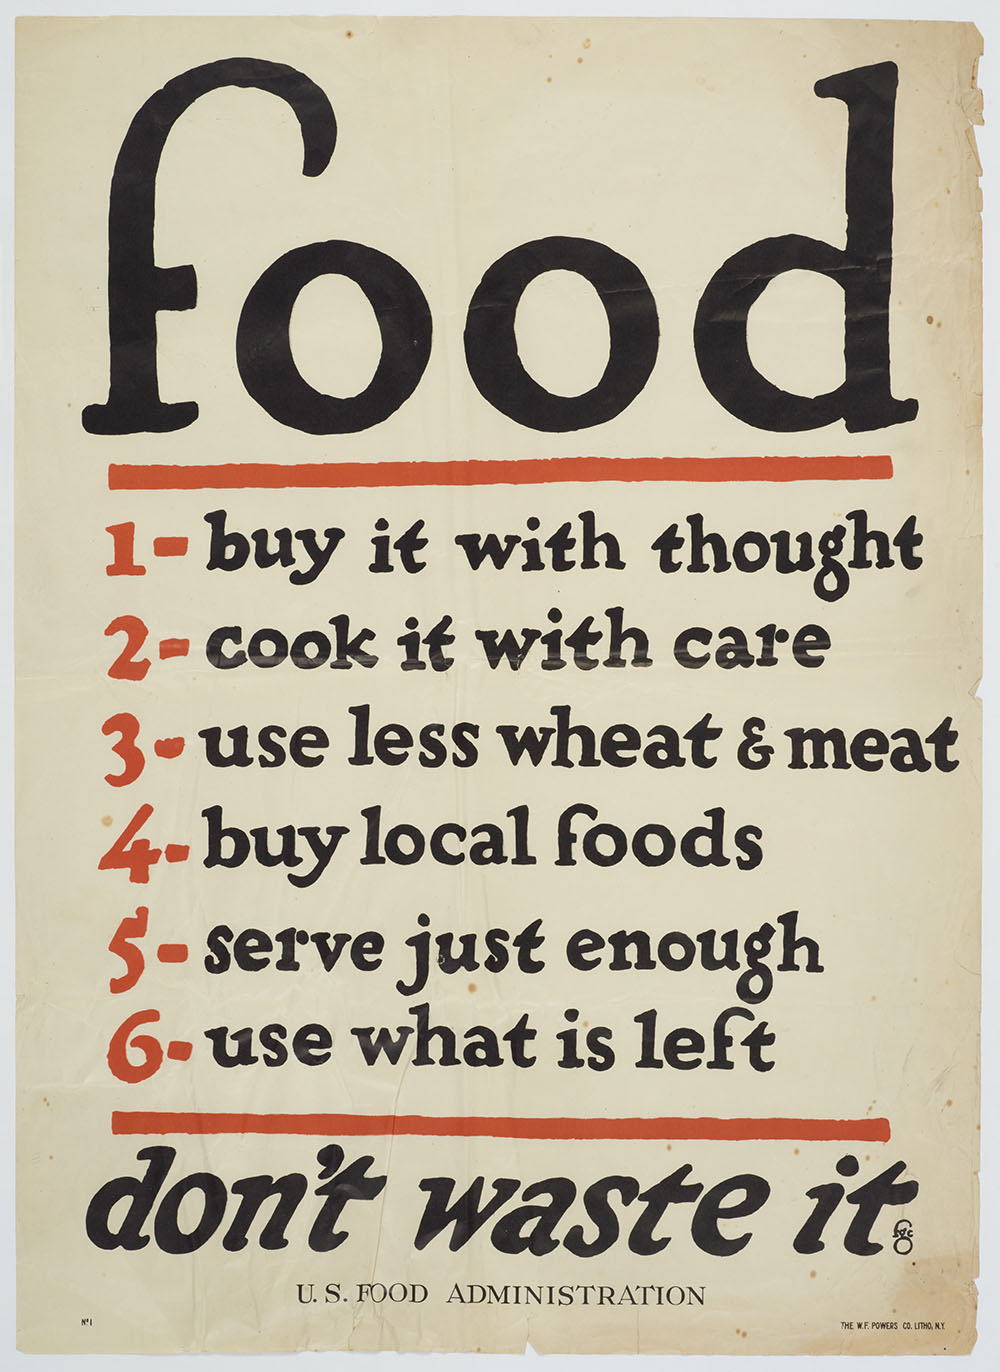 Poster with the words 'Food, 1, buy it with thought, 2, cook it with care, 3, use less wheat and meat, 4, buy local foods, 5, serve just enough, 6, use what is left, don't waste it